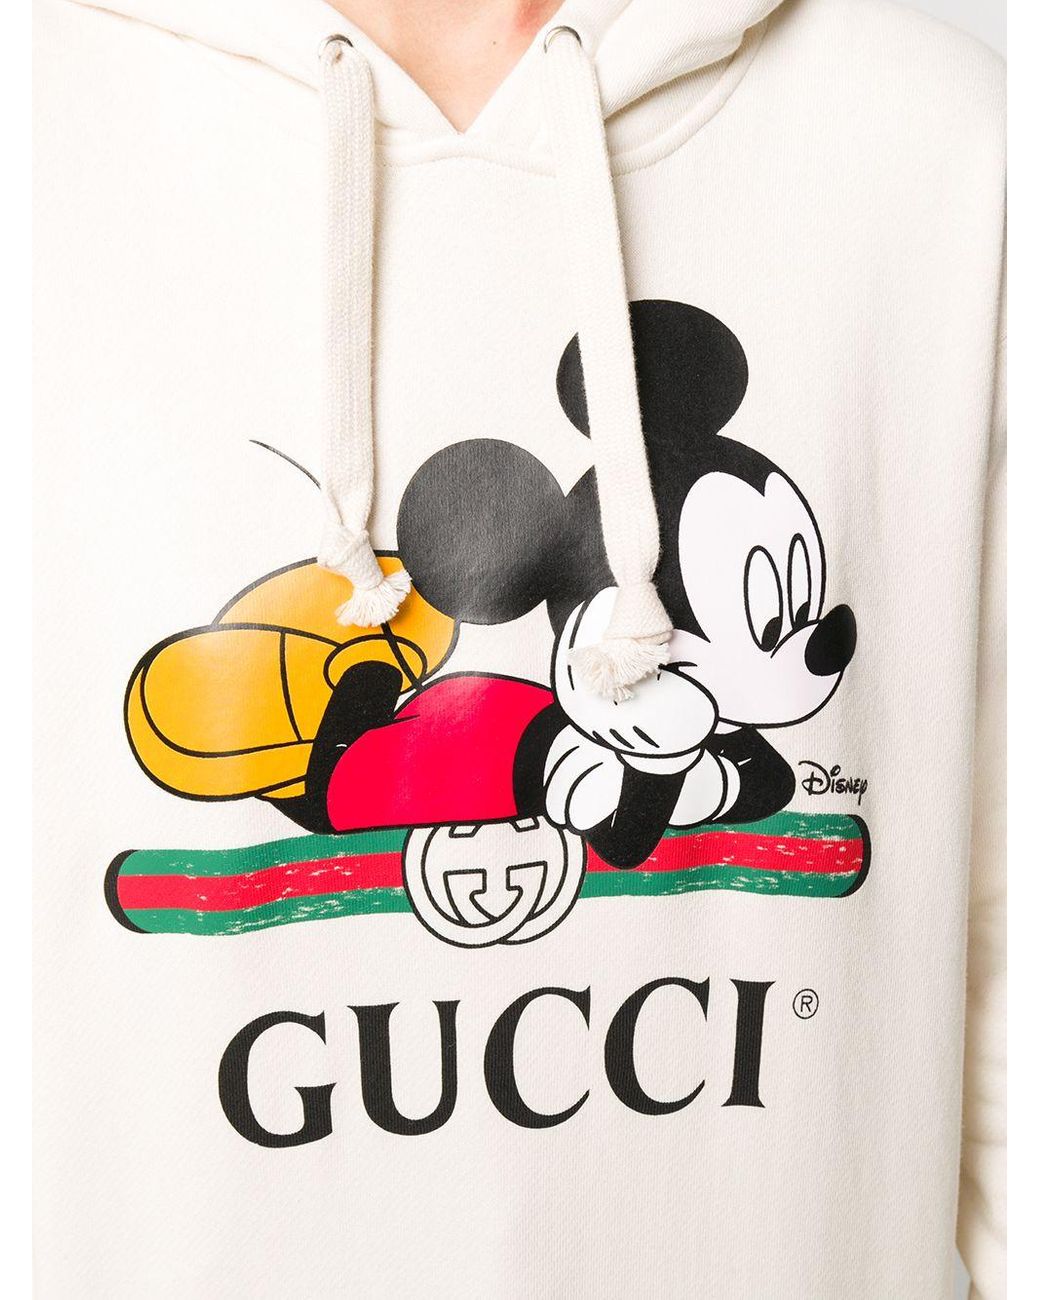 Gucci X Disney Mickey Mouse Hoodie | Lyst Canada